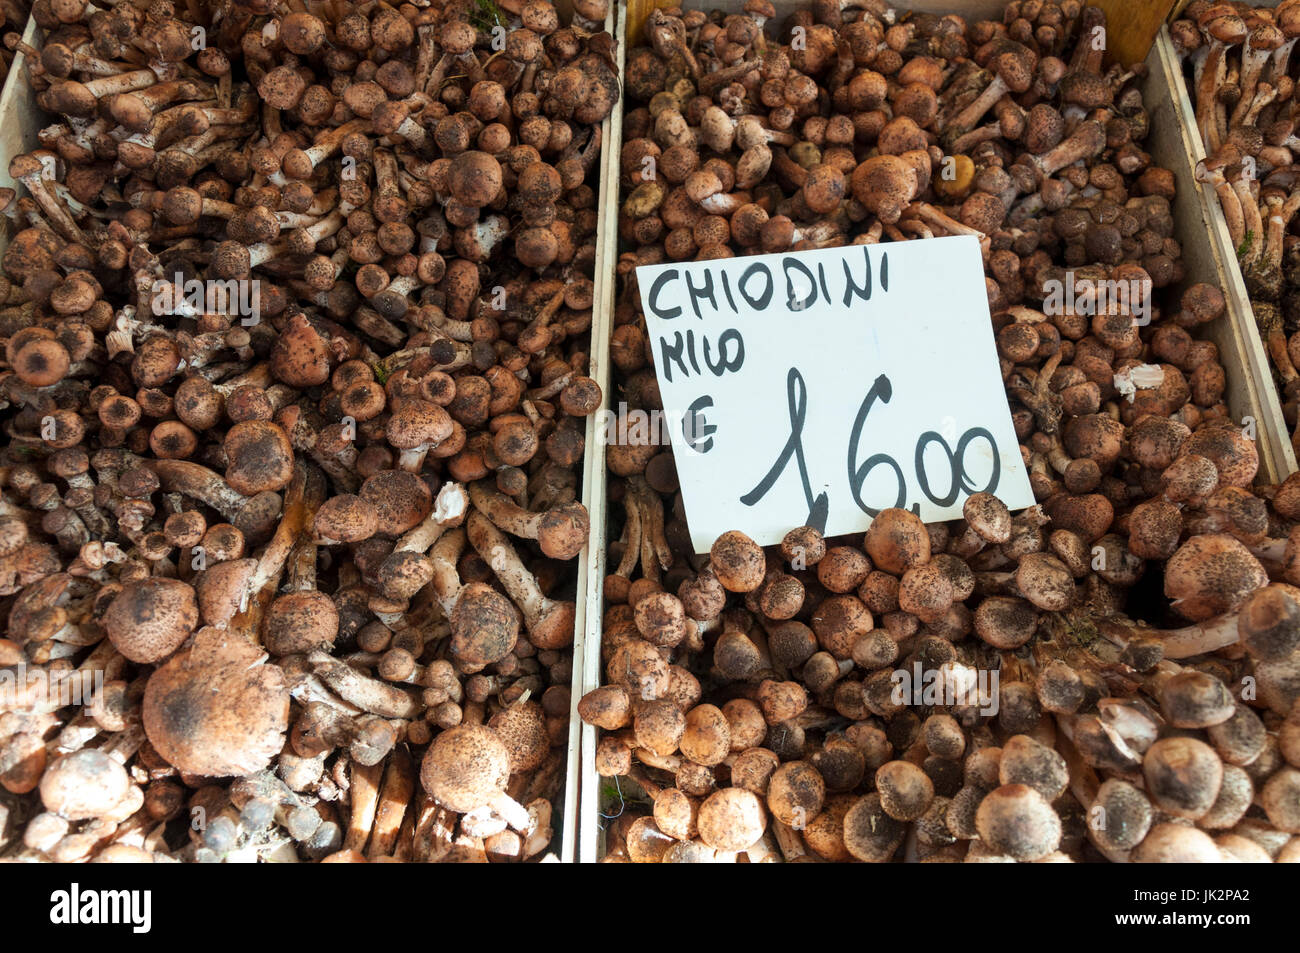 Varieties of wild mushrooms here Chiodini on sale at Rialto market in Venice Italy Stock Photo